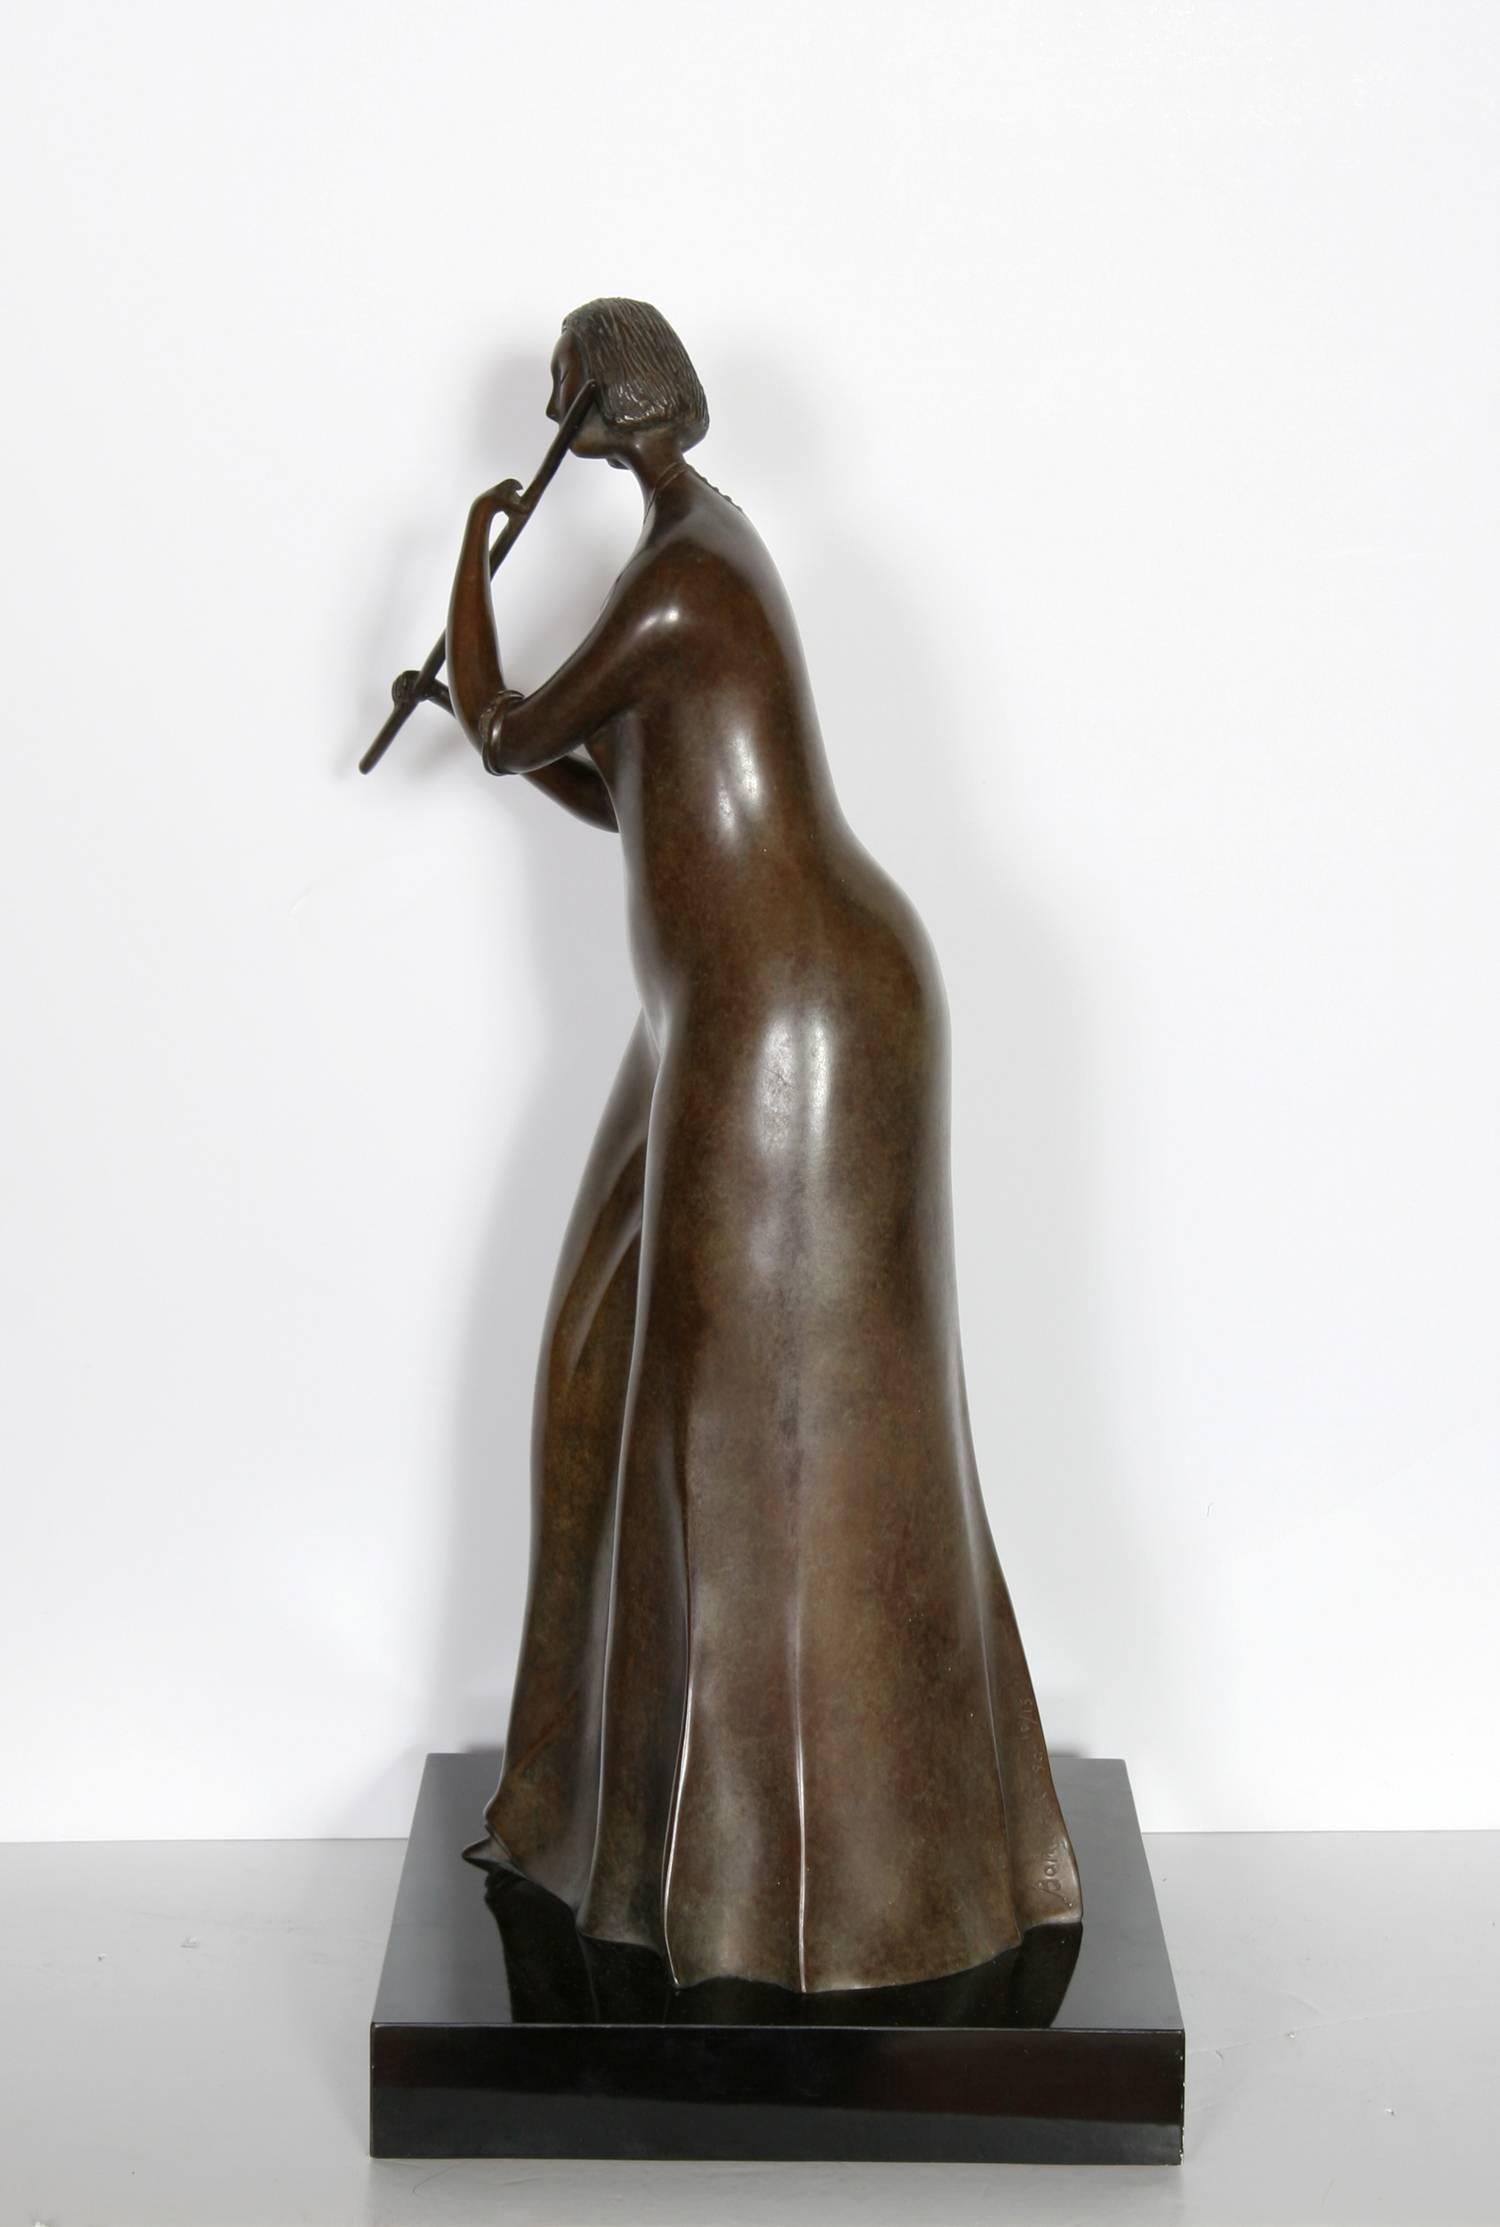 Artist: Branko Bahunek, Croatian (1935 - )
Title: The Flautist
Year: 1990
Medium: Bronze Sculpture, Signature and number inscribed
Edition: 10/15 
Size: 20.5 in. x 8 in. x 8 in. (52.07 cm x 20.32 cm x 20.32 cm); 23 inches tall incl. base 